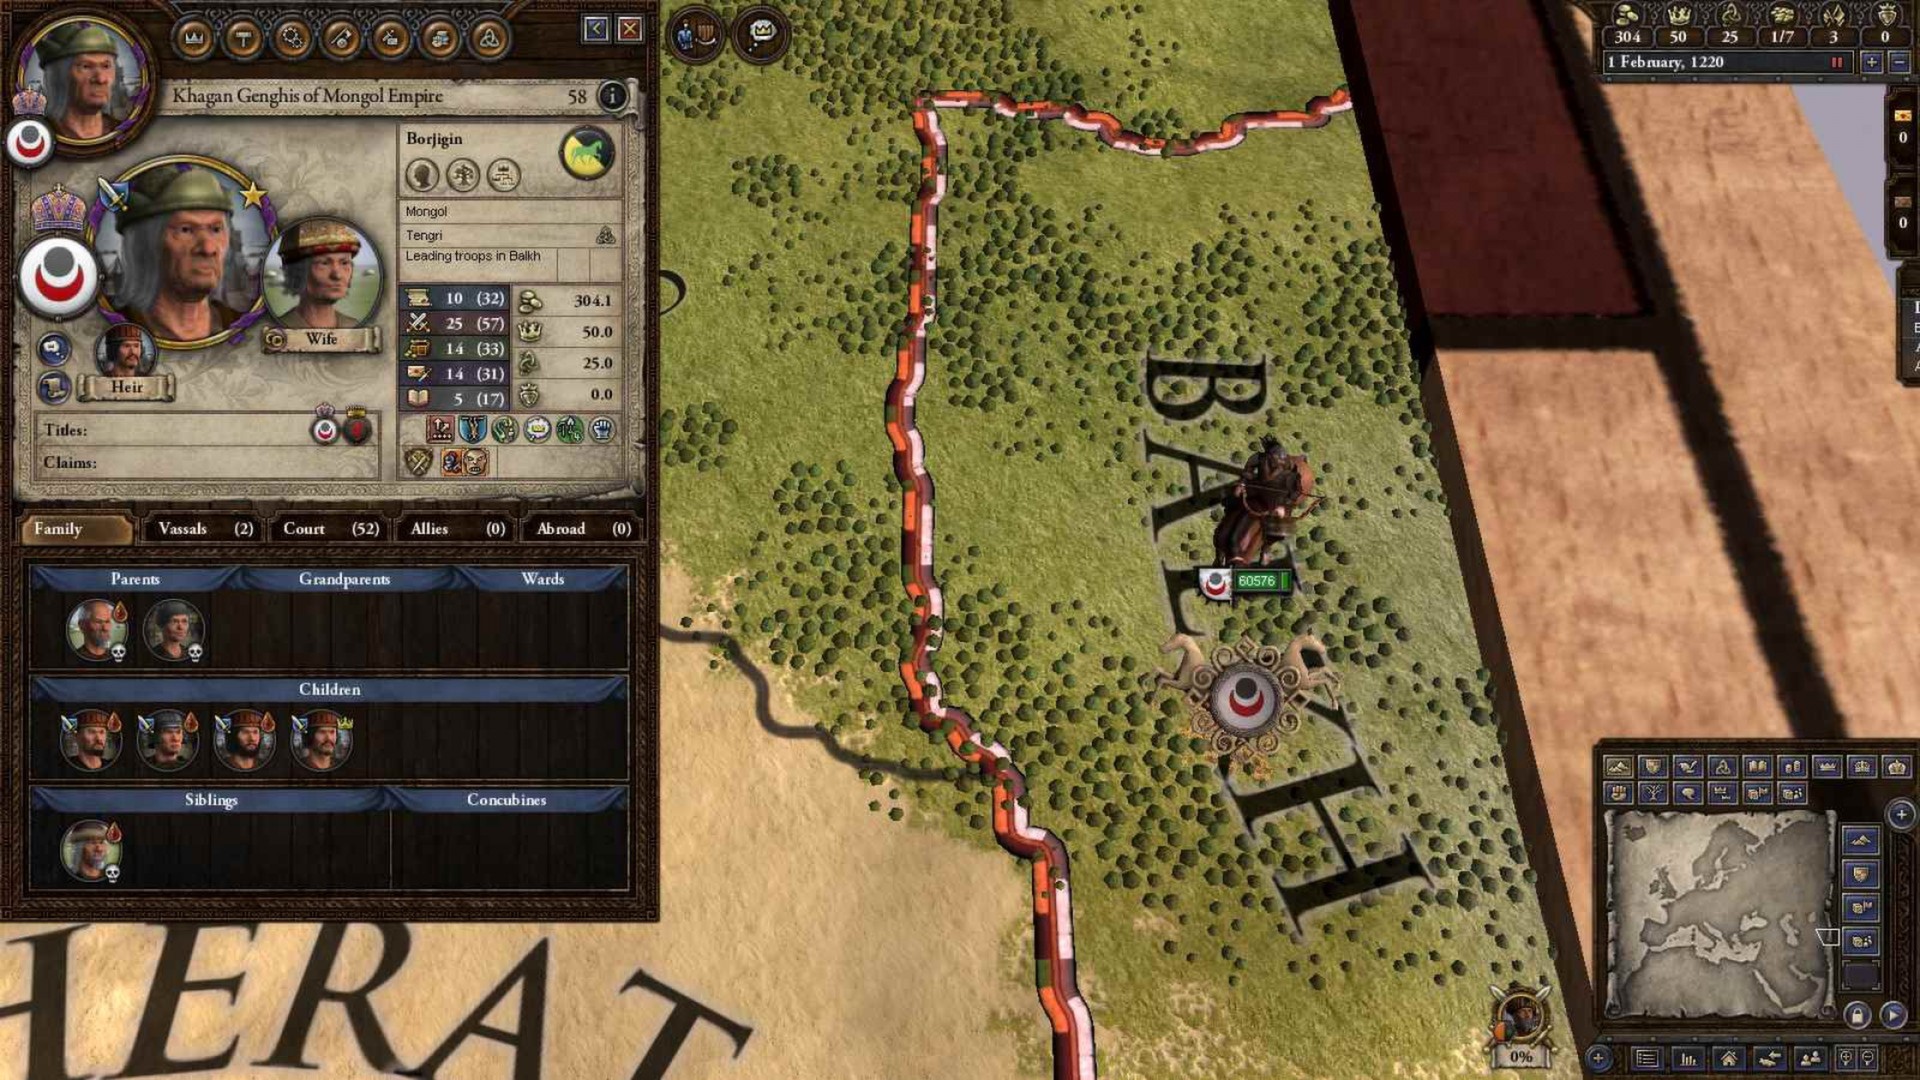 Expansion - Crusader Kings II: The Old Gods Featured Screenshot #1